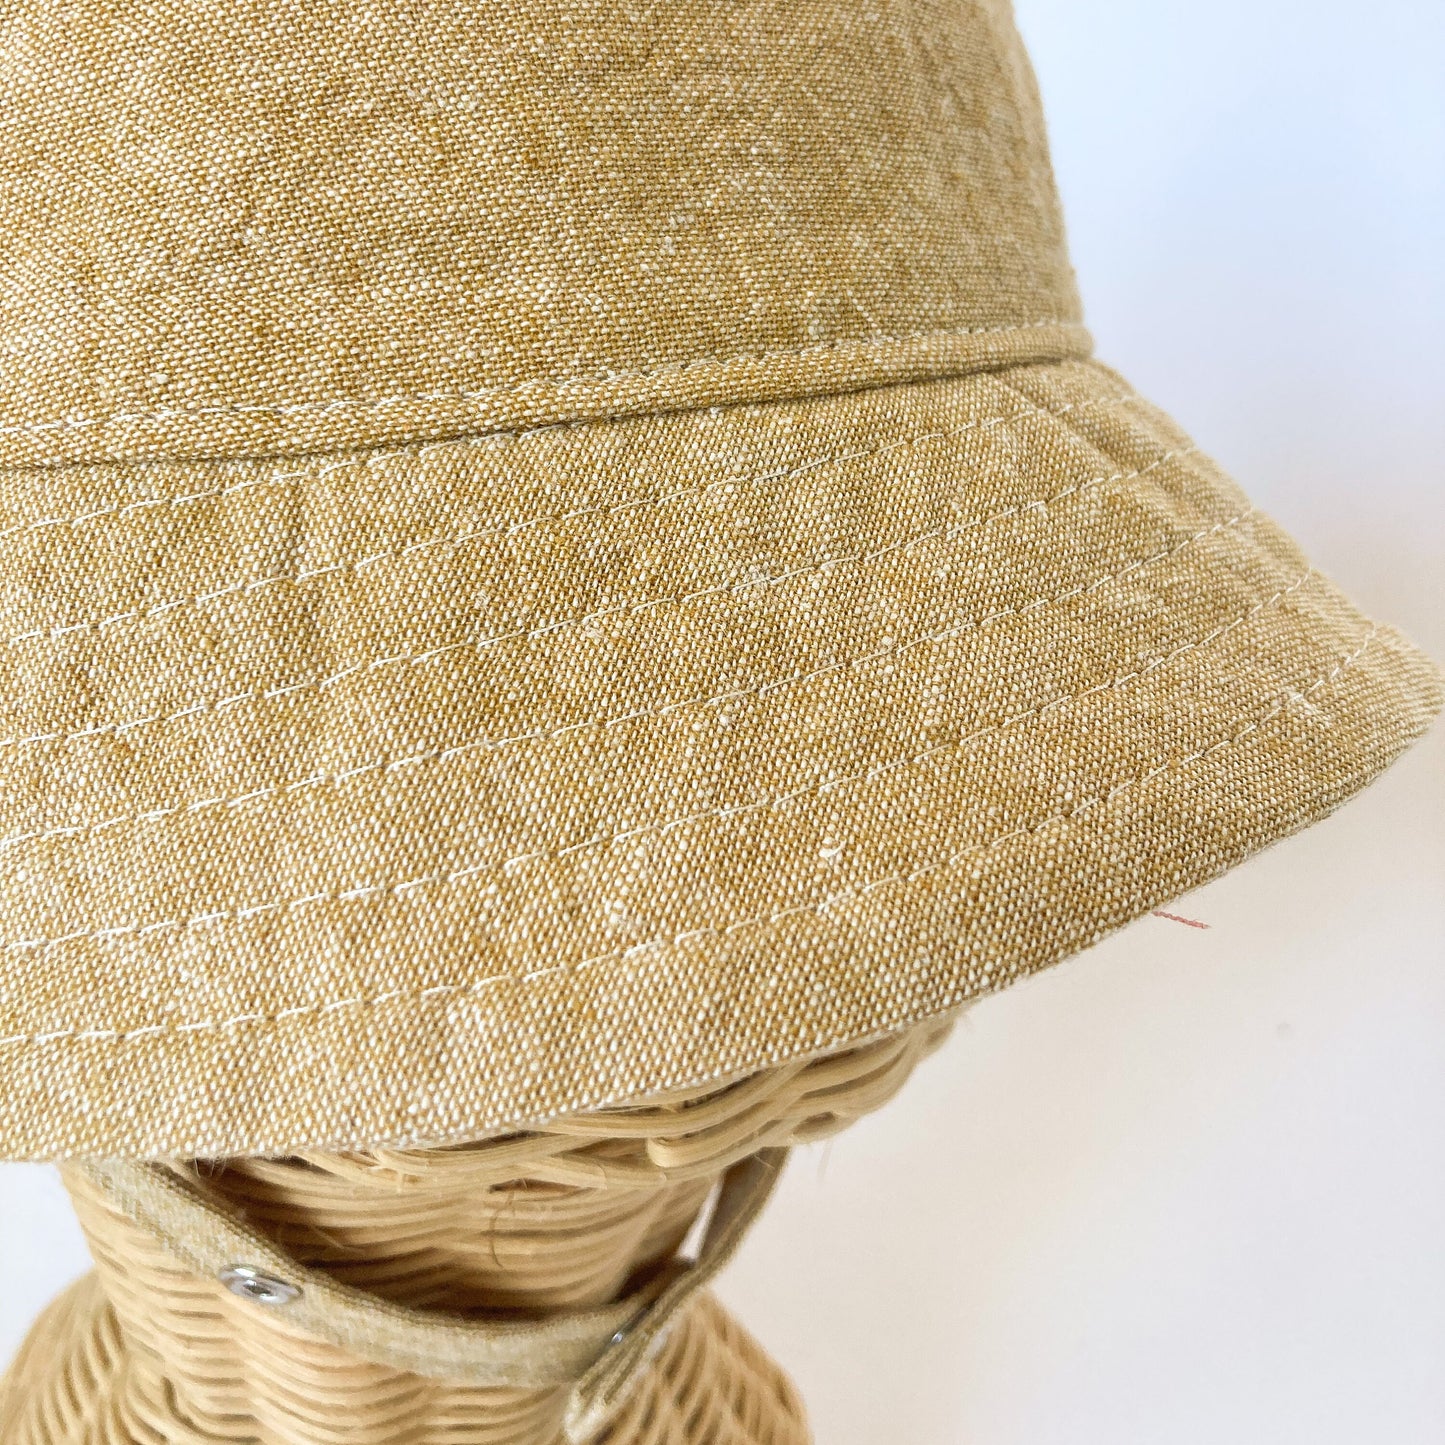 Bucket Sun Hat for Toddlers, Hat for Boys, Kids Summer Hat, Sun Protection, Beach Accessories, Gender Neutral Baby Gift, Linen Fabric Hat